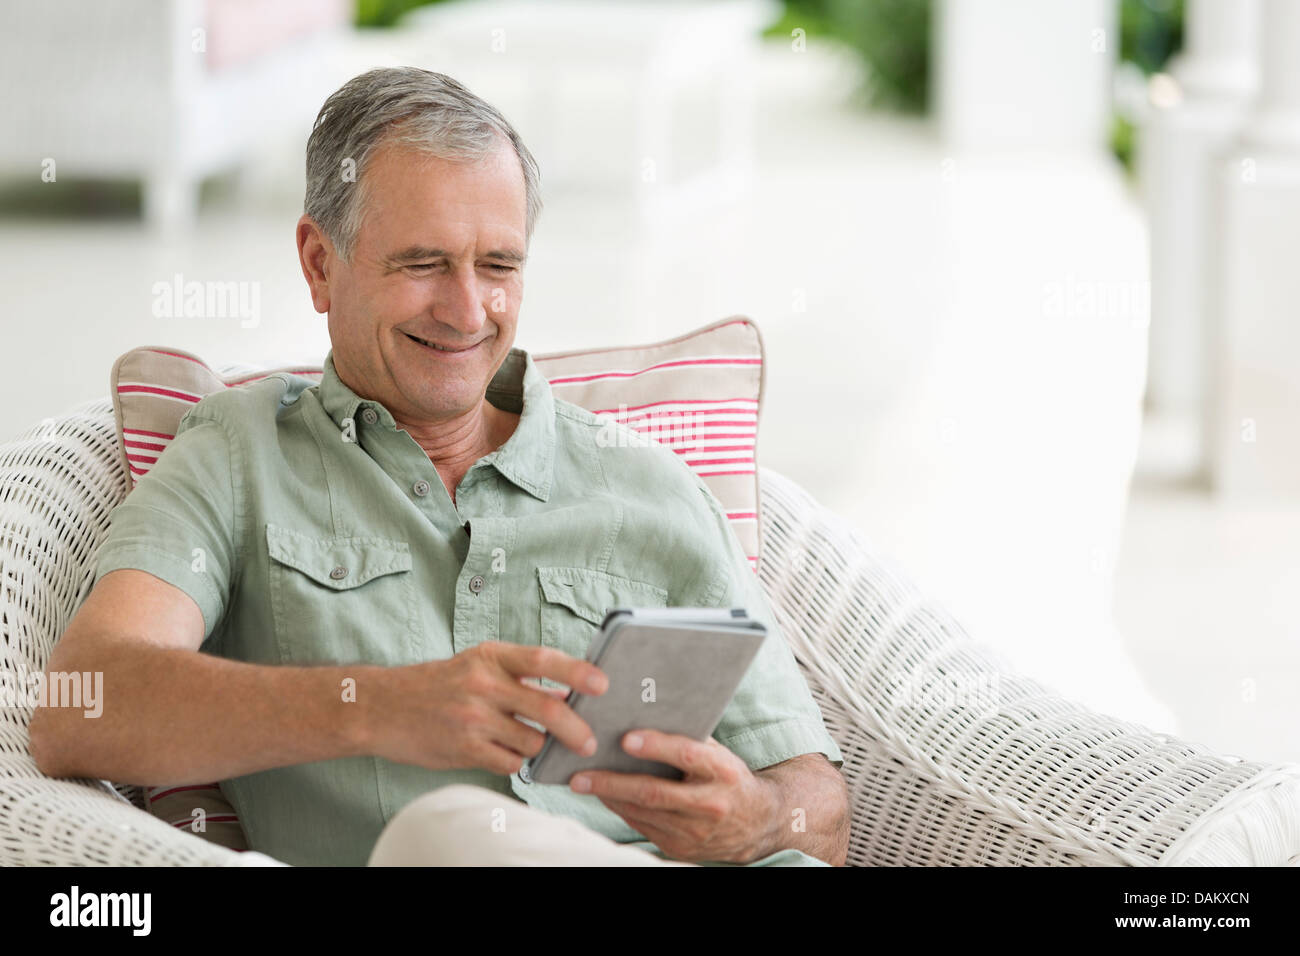 Older man using tablet computer on porch Stock Photo